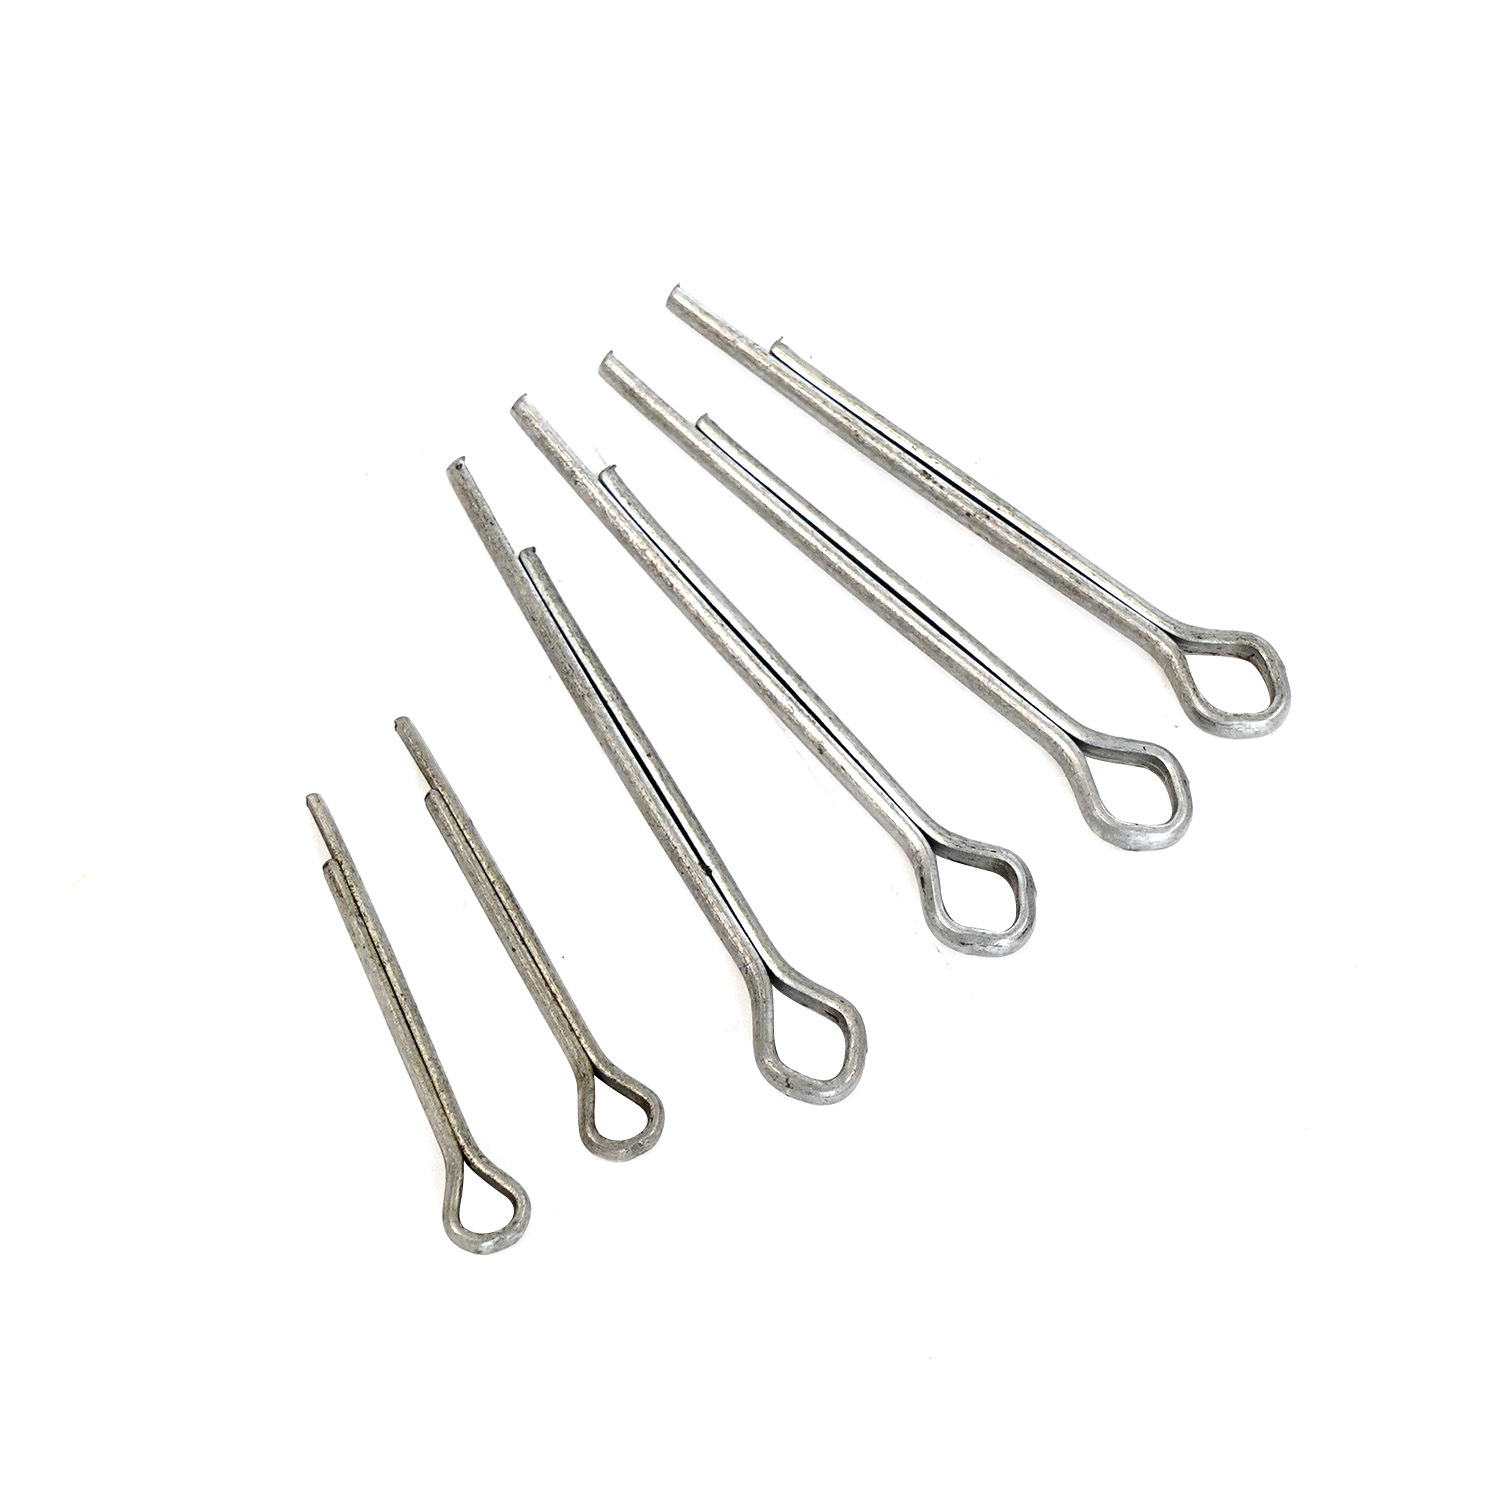 OEM/ODM Manufacturer Manufacturer GB91/ DIN94 /ISO 1234/ BS1574 B Type Split Pin Cotter Pin Safety Pin Spring Pin Clevis Pin Taper Pin Lock Pin for Factory Made in China